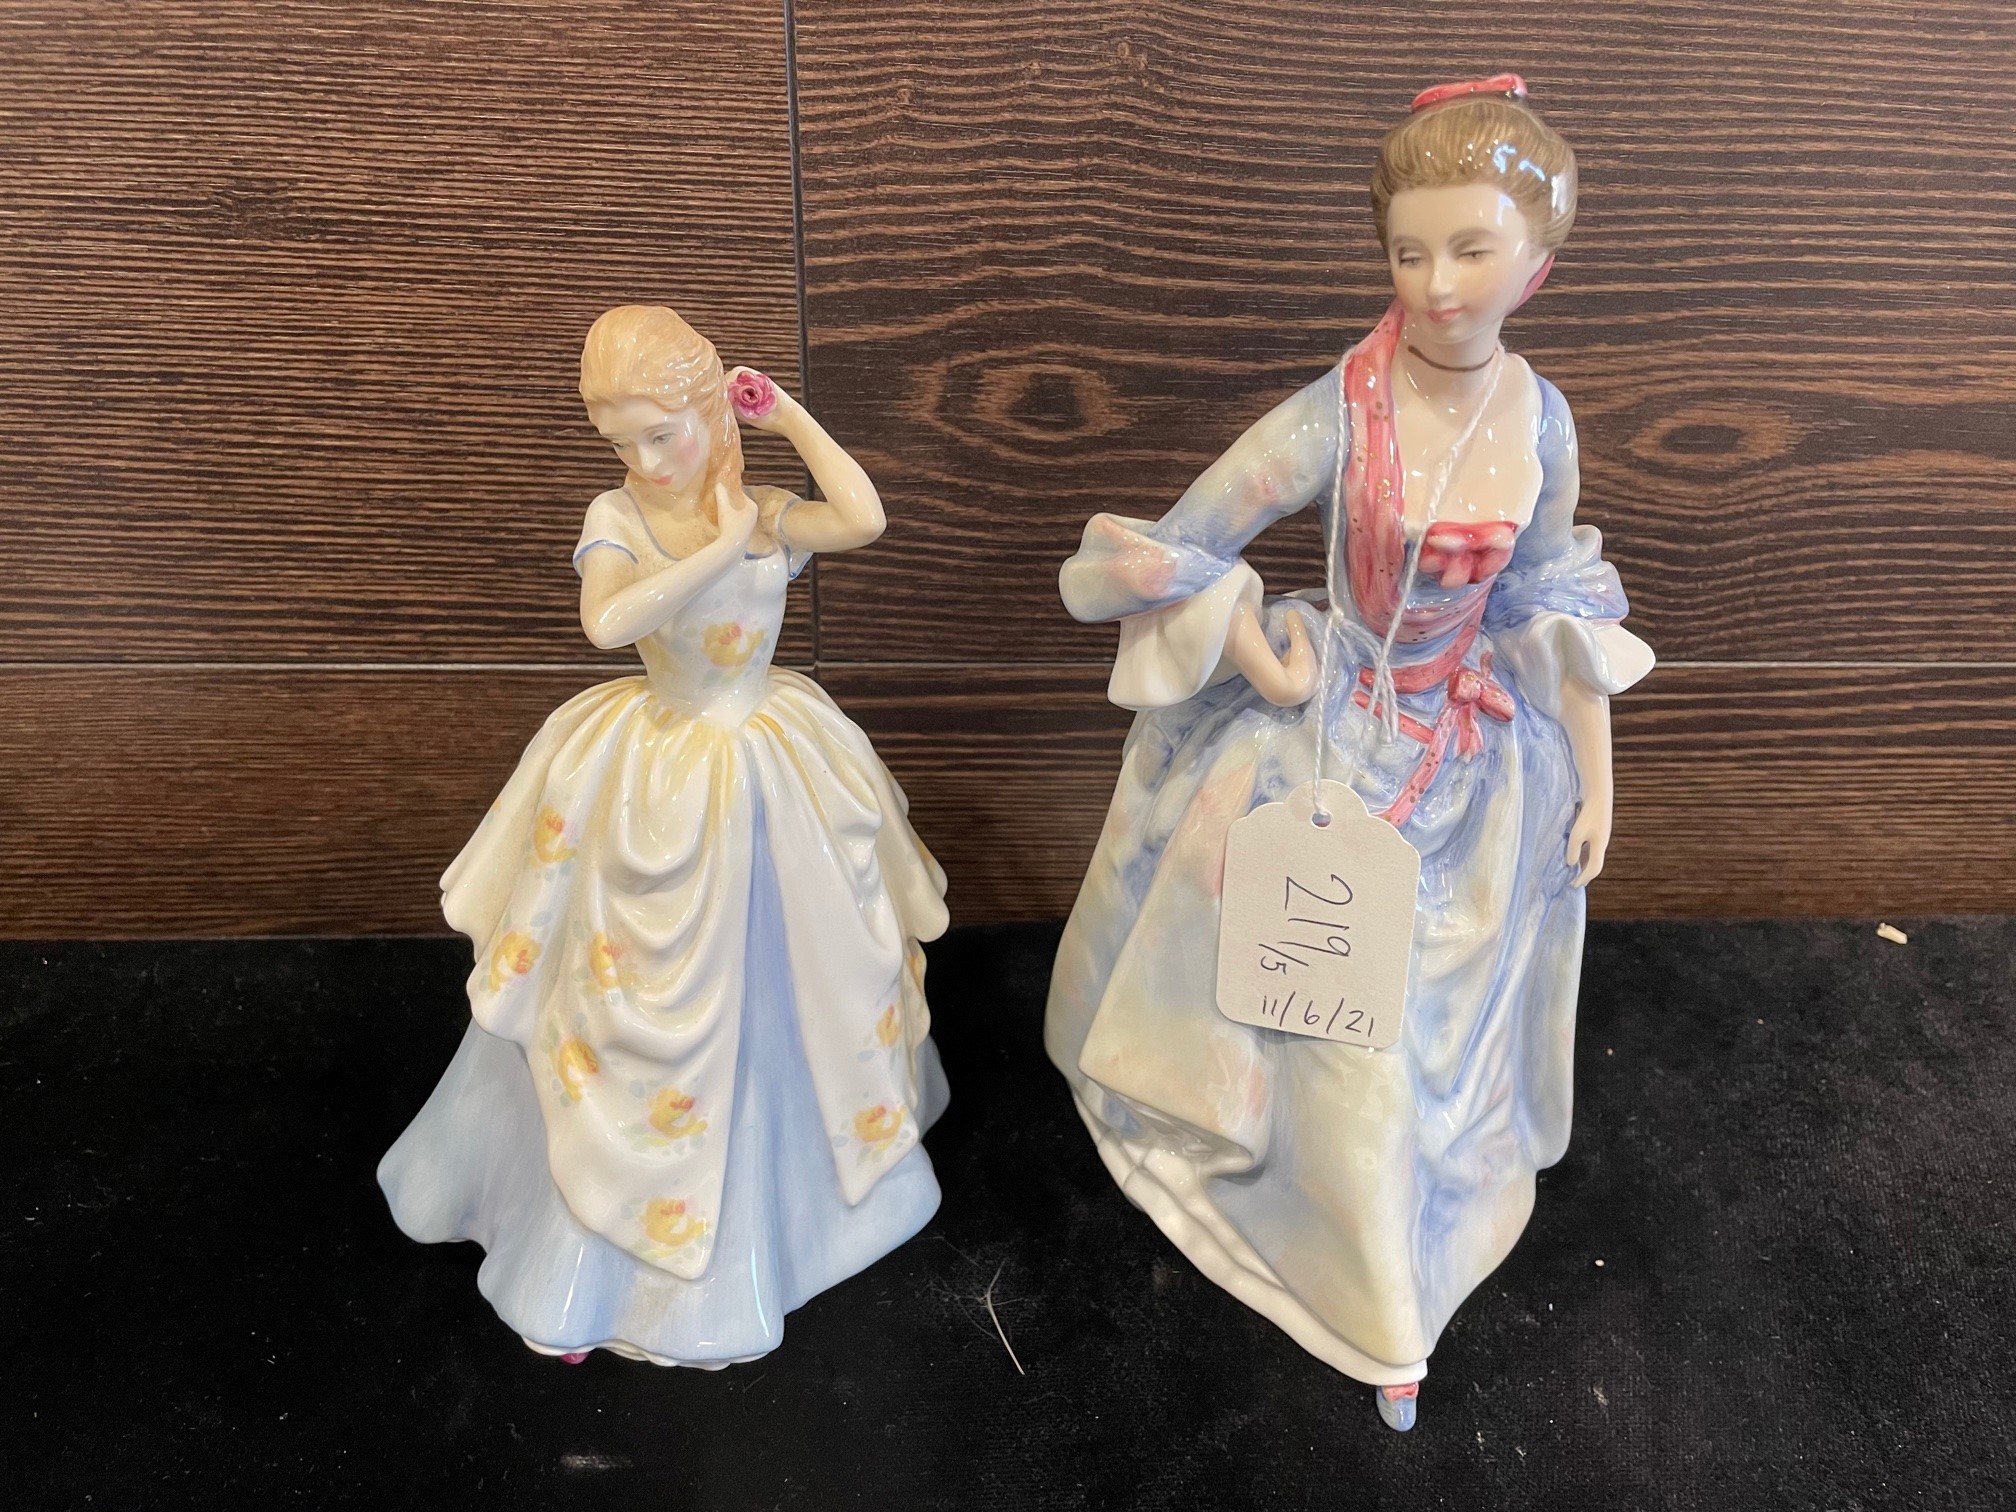 A ROYAL DOULTON FIGURE OF 'MELODY' AND FOUR OTHER ROYAL DOULTON FIGURES - Image 2 of 2